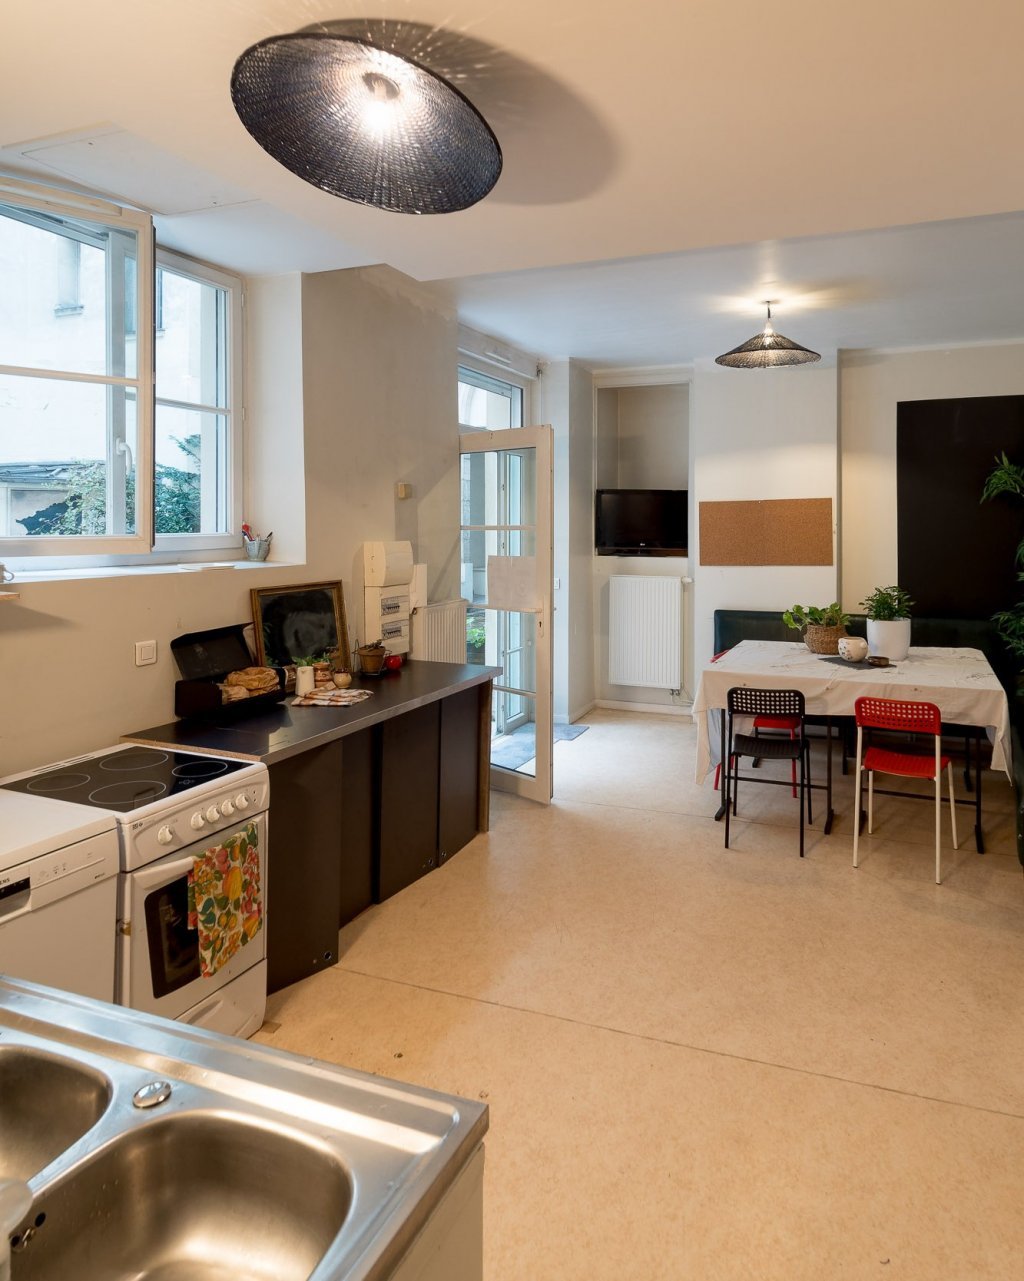 The kitchen is one of the common areas for all roommates | Photo: RIVP